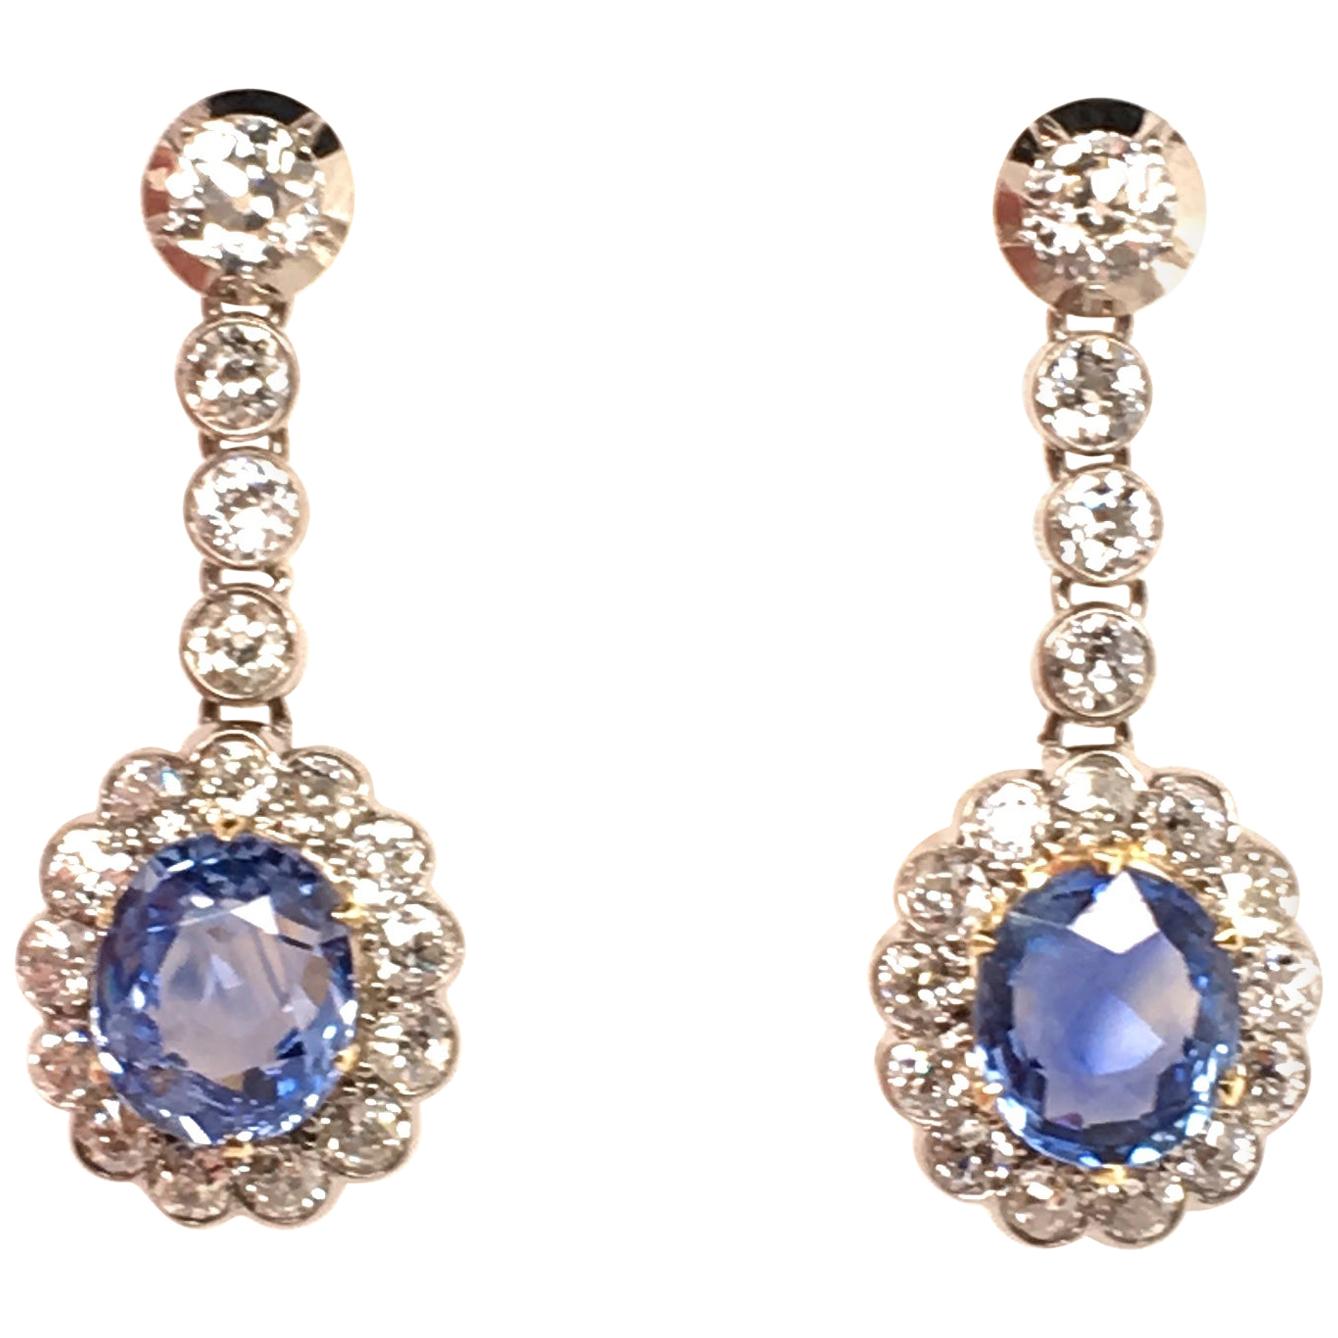 Pair of Antique Sapphire and Diamond Earrings